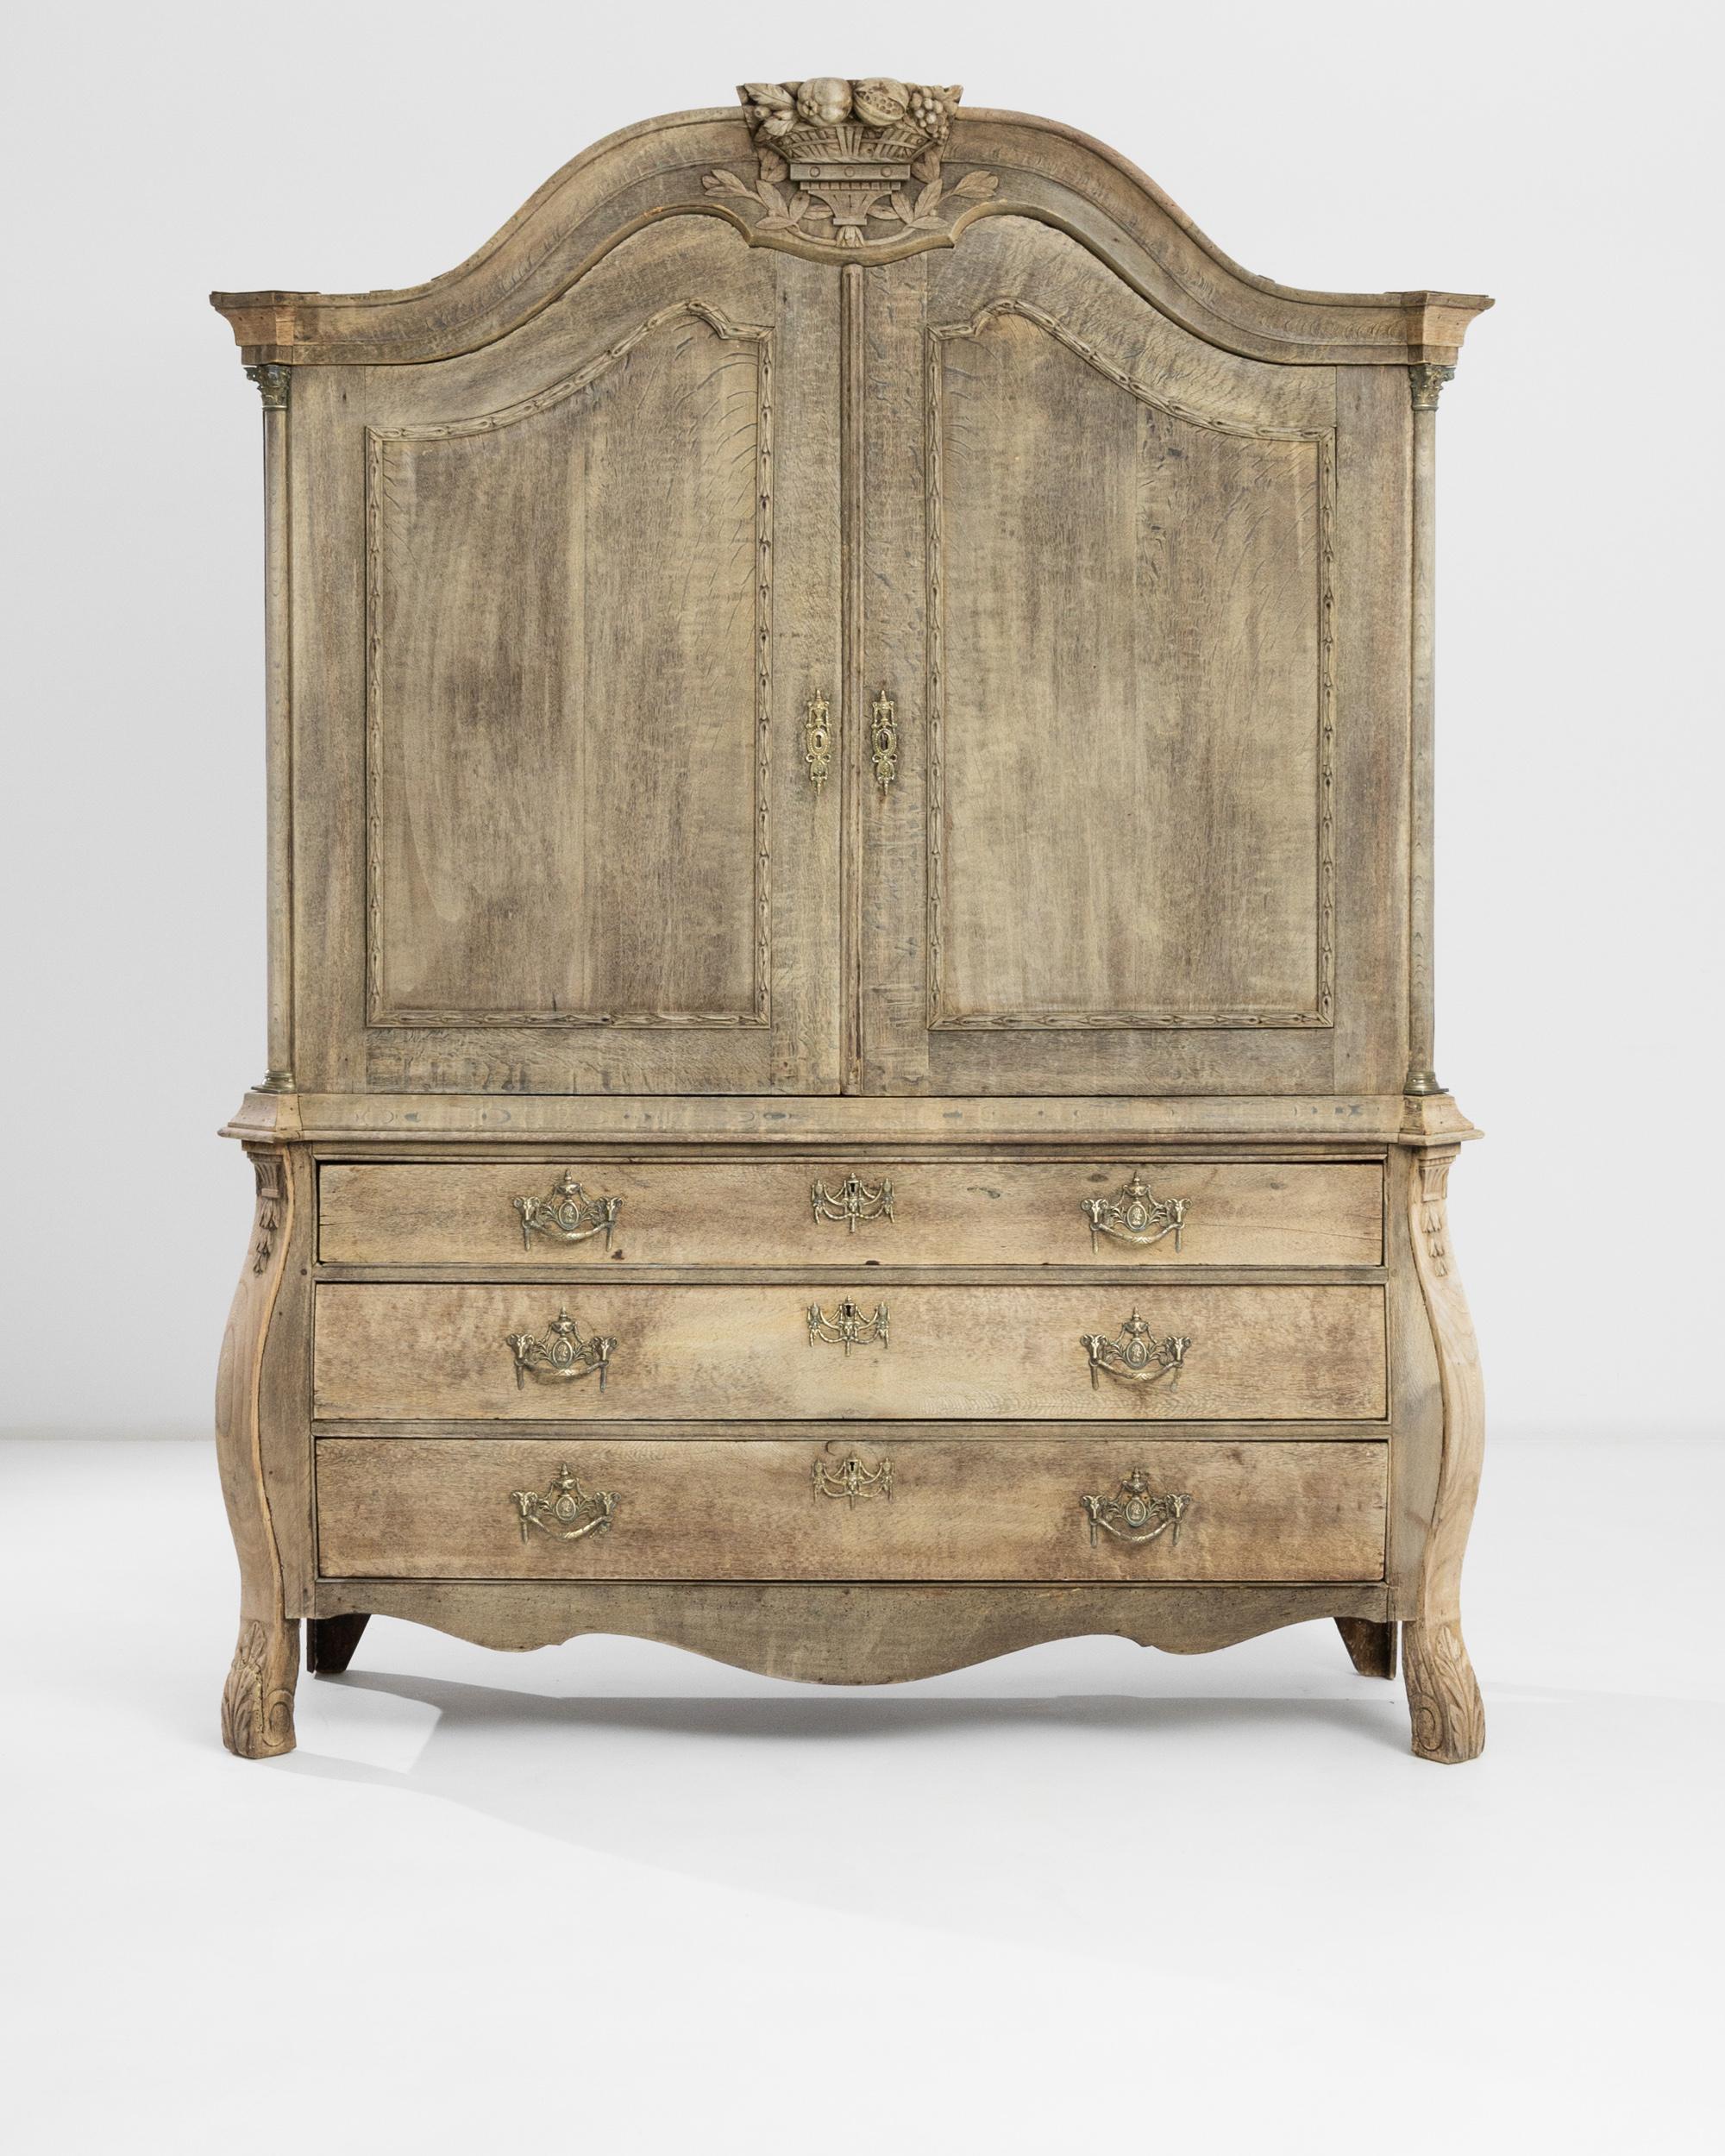 An 1800s Dutch bleached oak cabinet. This grand cabinet offers three sliding bottom drawers and a large top compartment fit with subsequent, smaller drawer pulls. A scrupulously hand-carved detail of a cornucopia sits atop it, while roman motifs